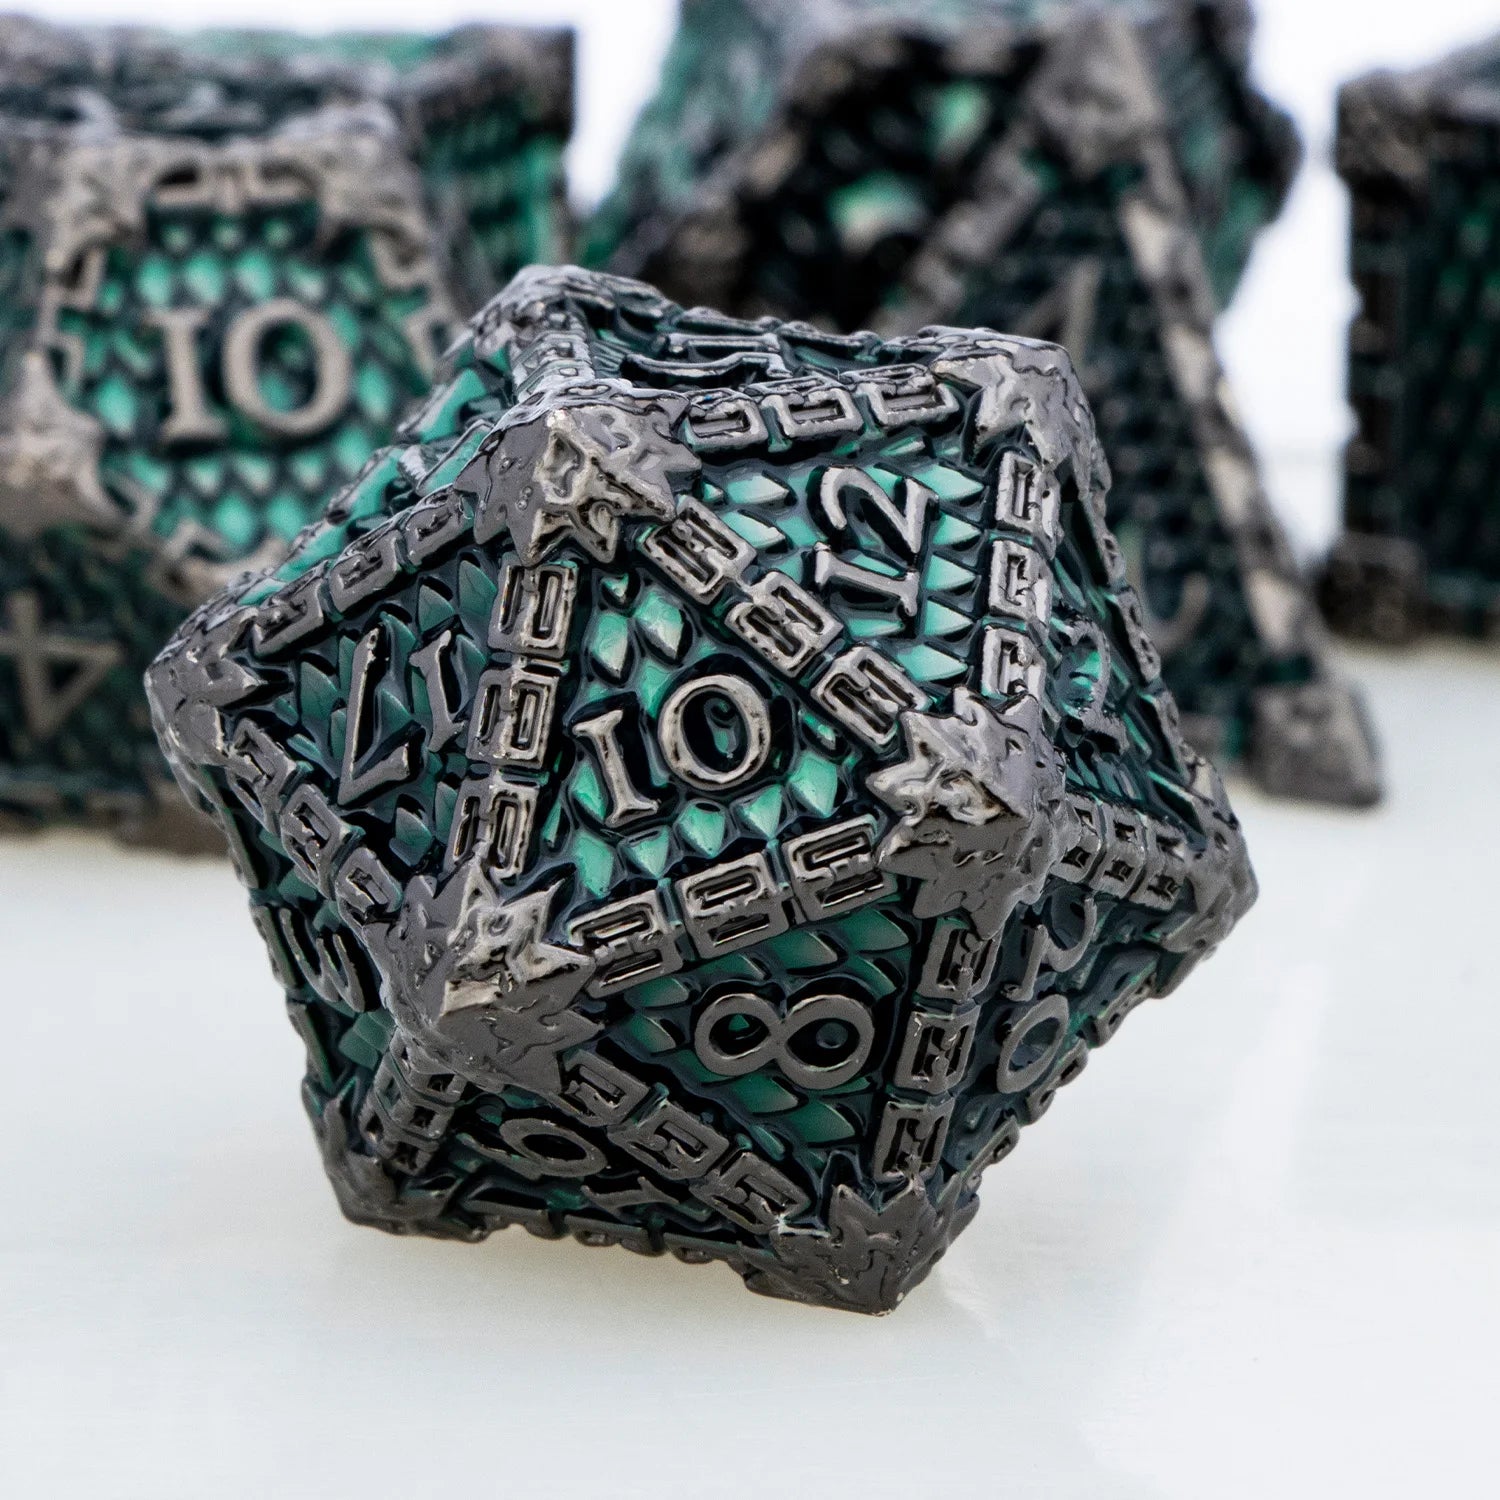 DND Metal Dice Set Dragon Scale D&D Dice Dungeon and Dragon Role Playing Games Black Green Polyhedral Dice RPG D and D Dice